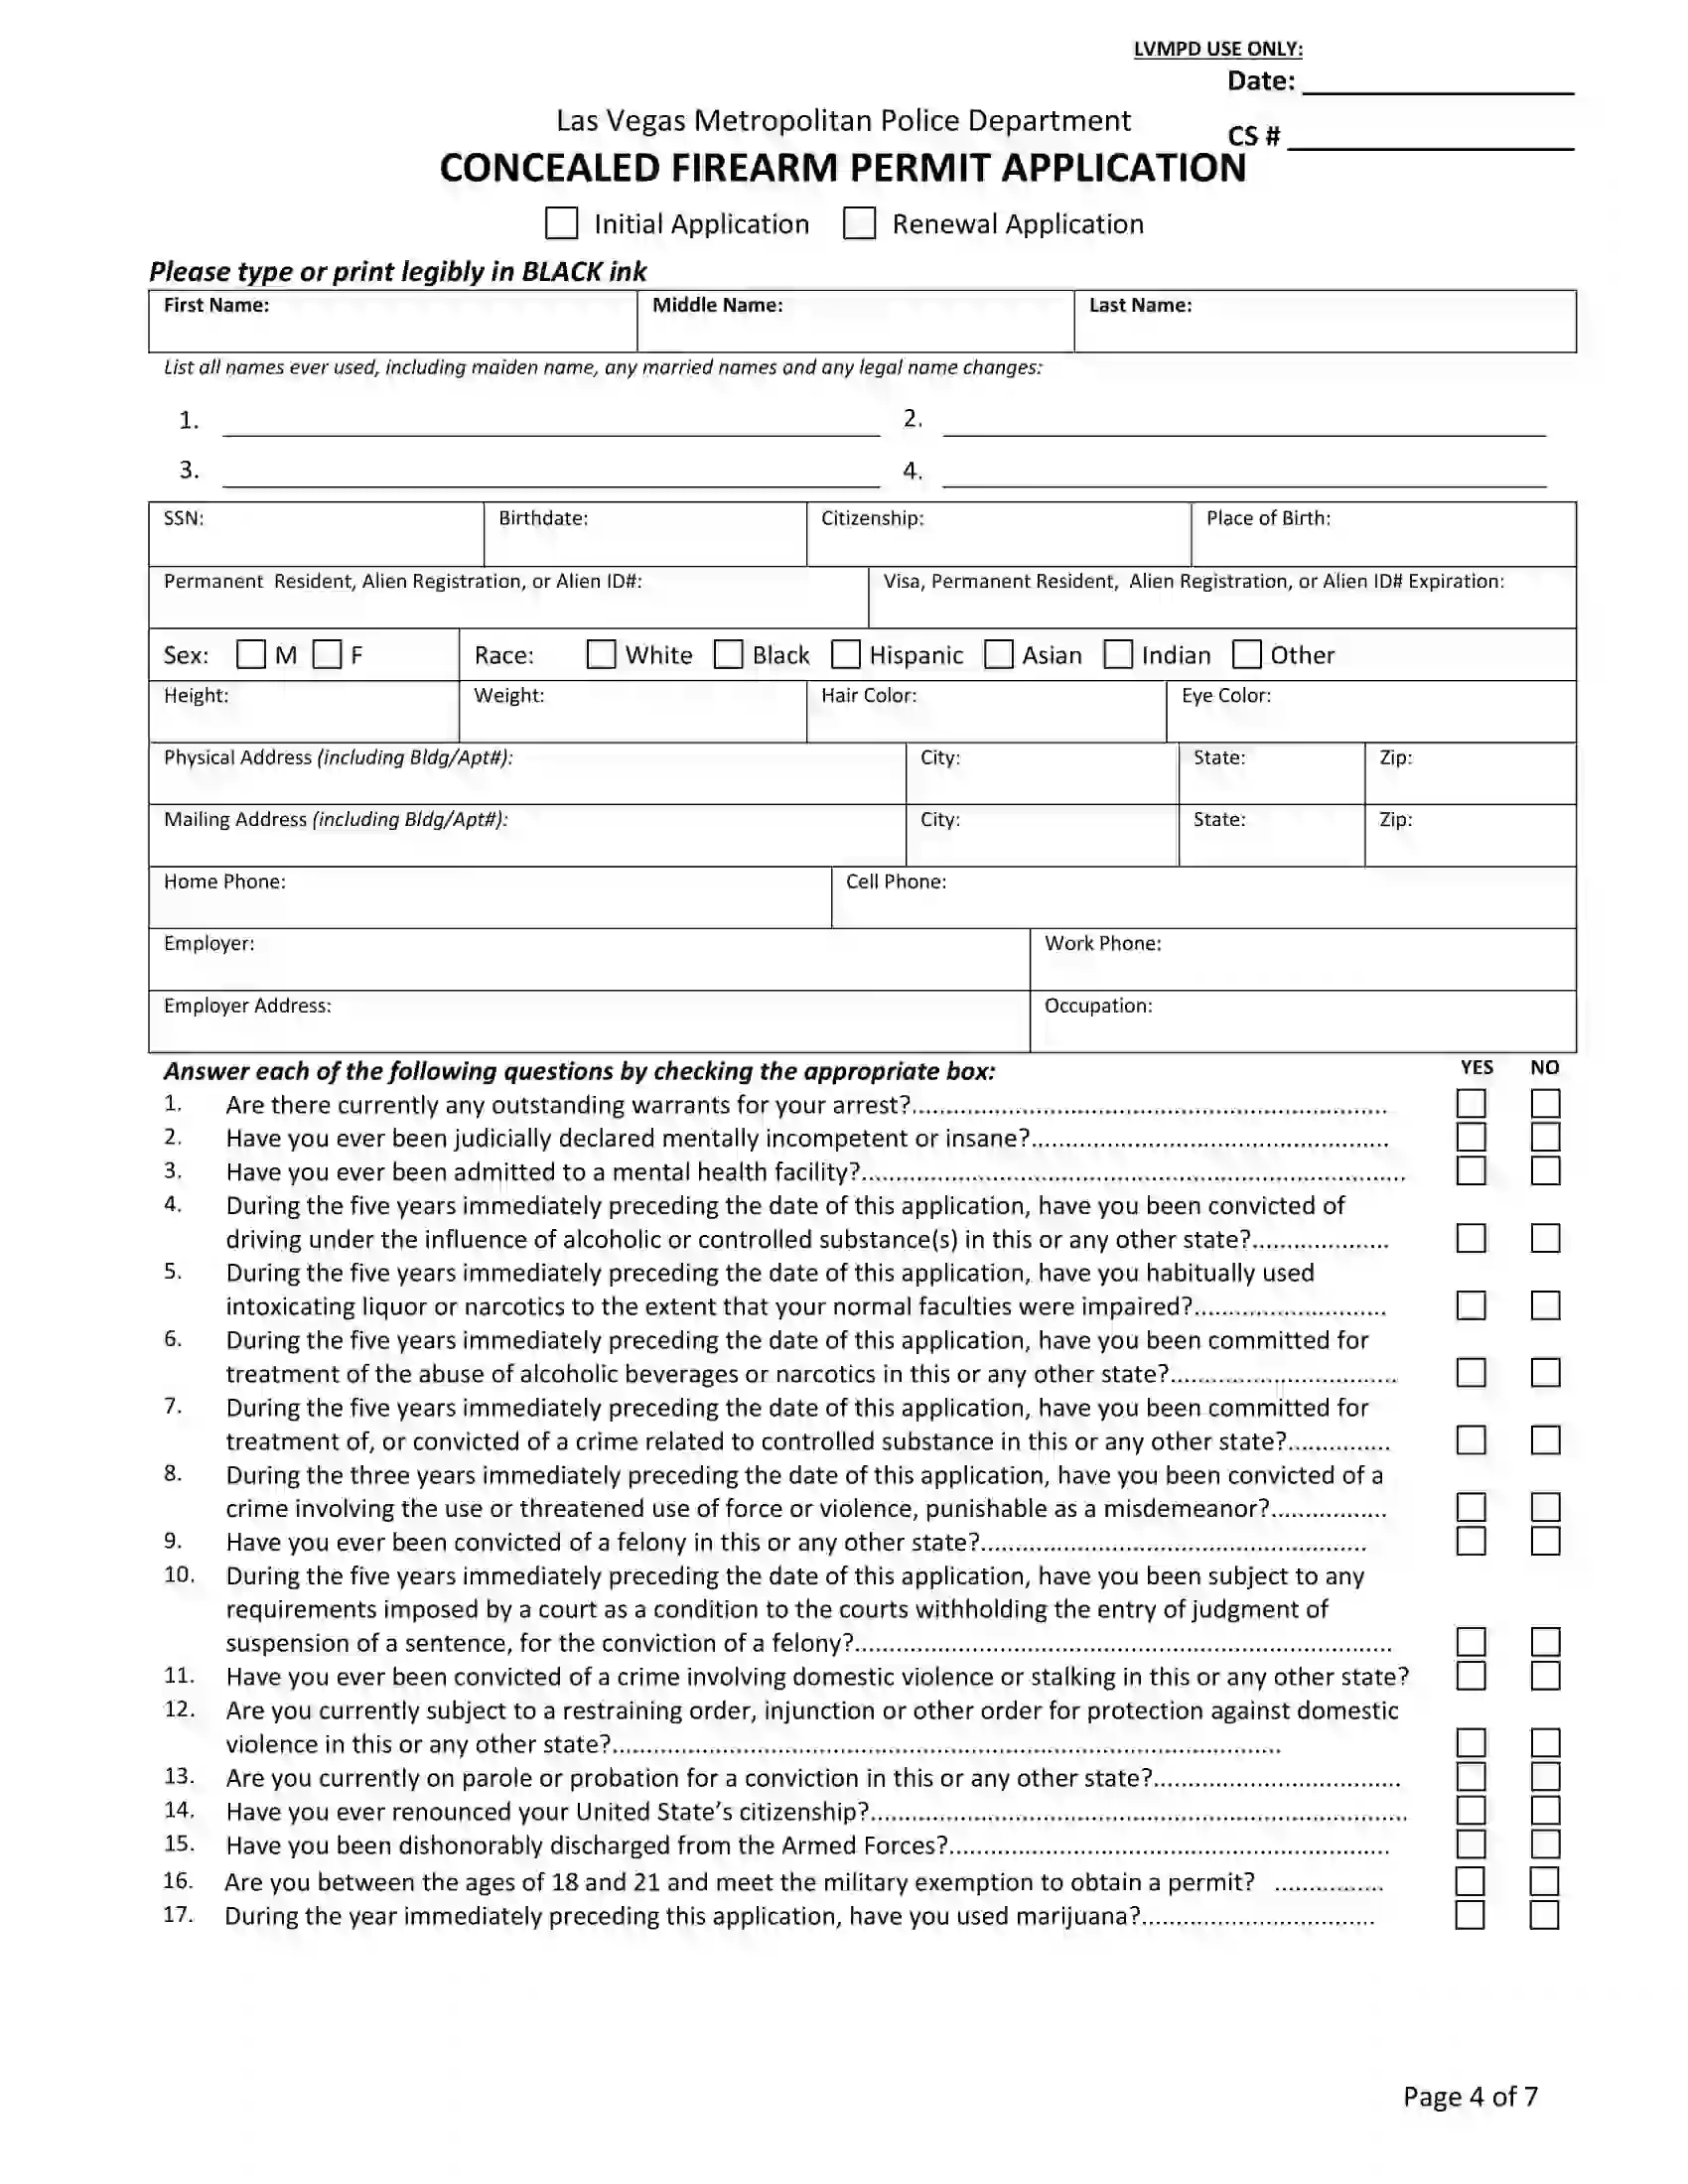 Concealed Firearm Permit Application